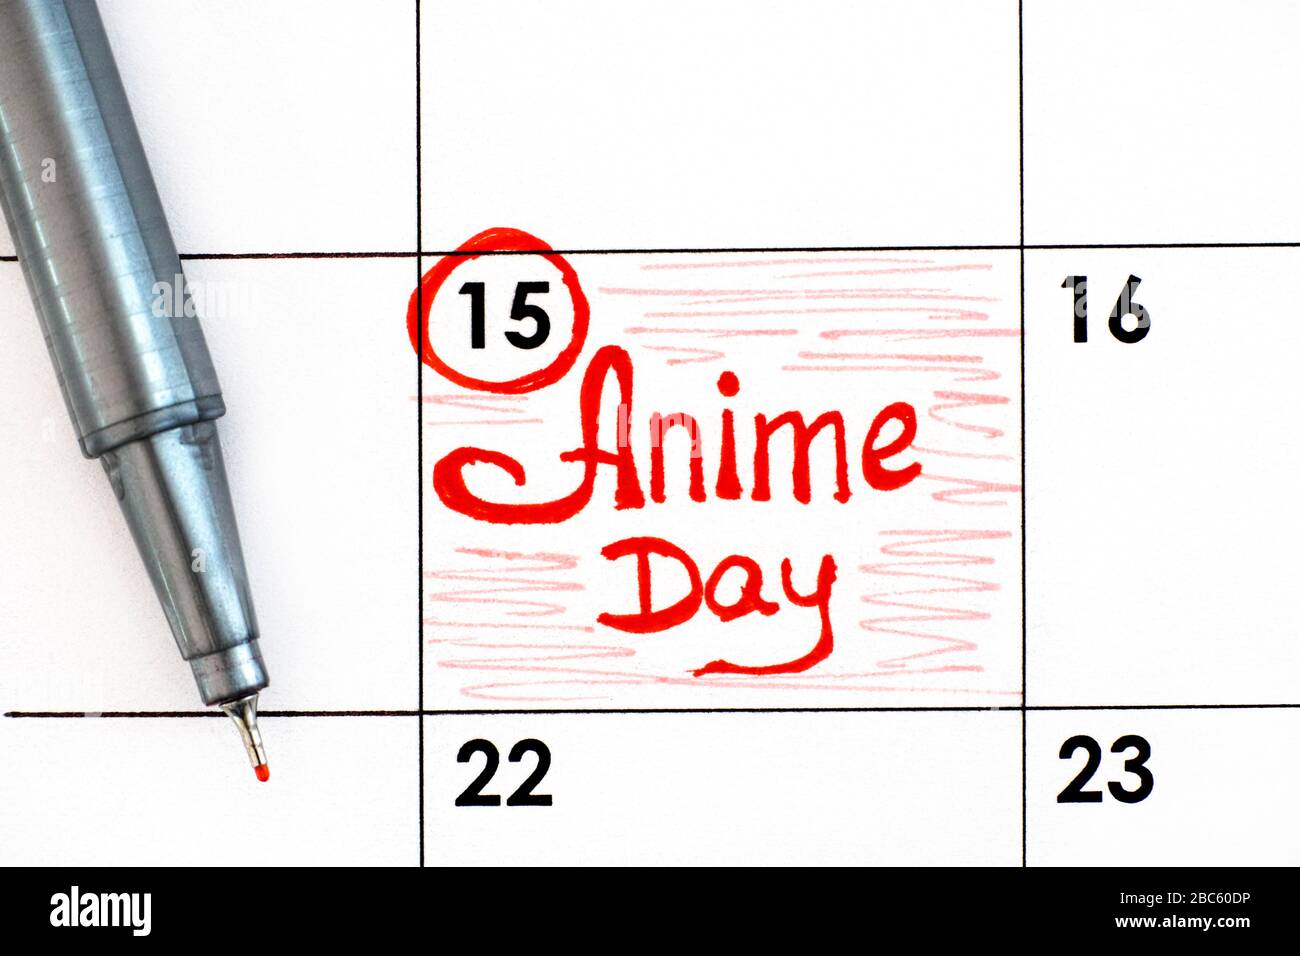 Reminder Anime Day in calendar with red pen. April 15 Stock Photo - Alamy